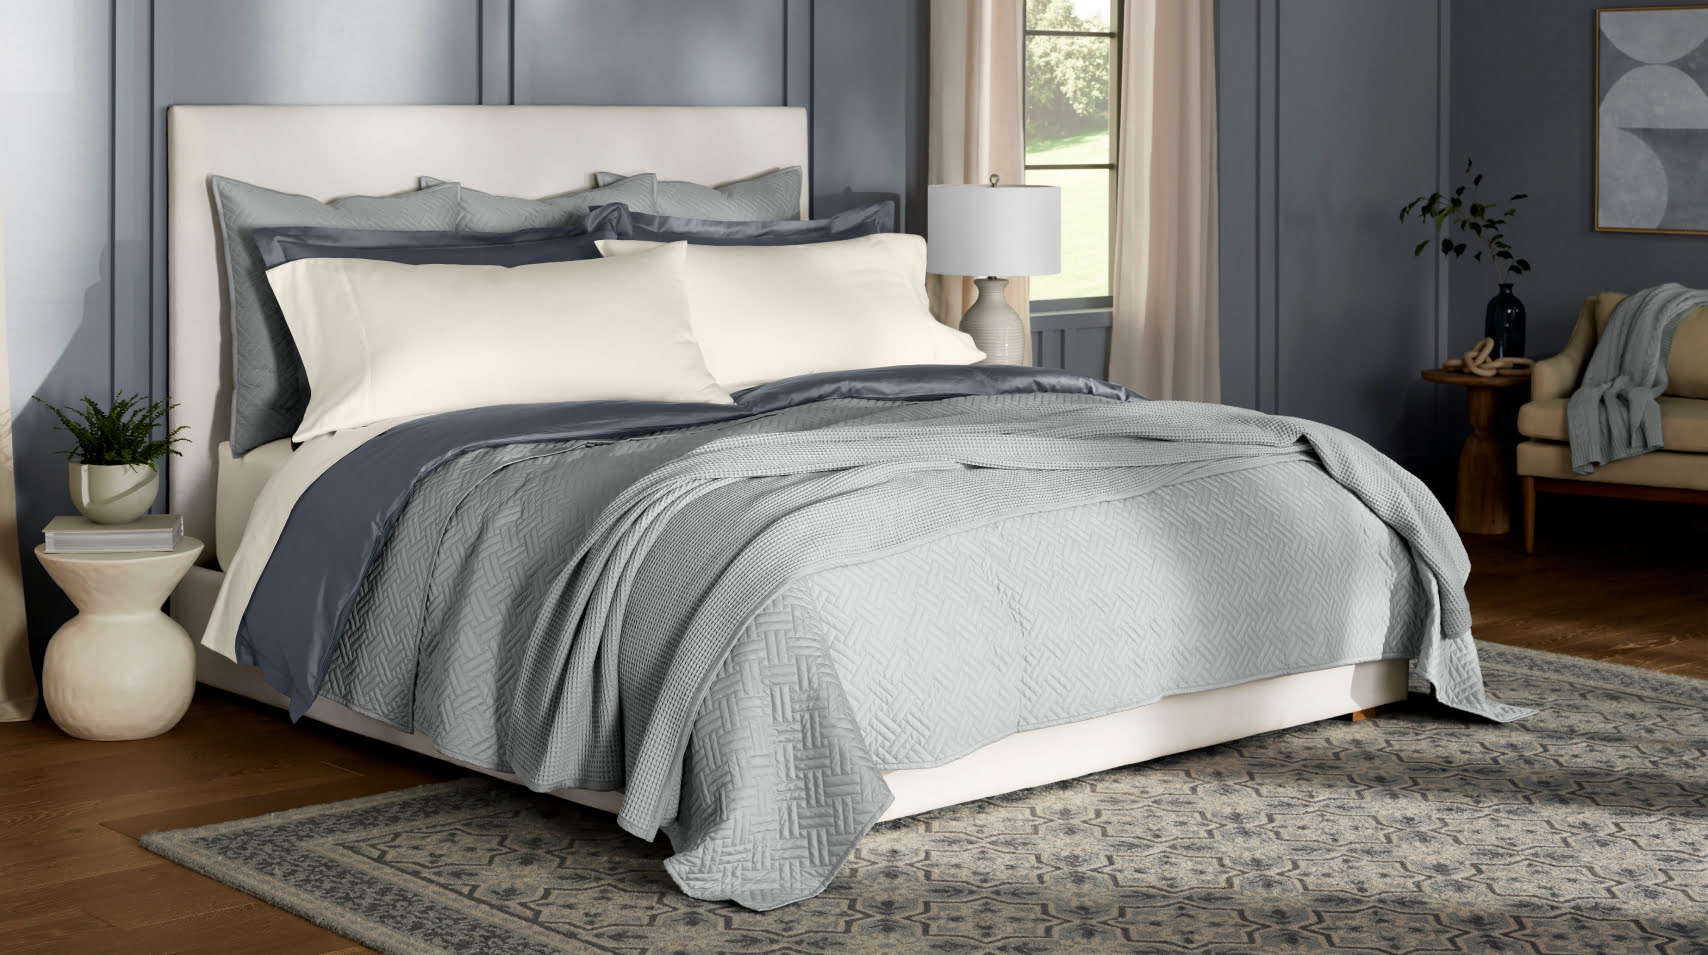 Do Queen Sheets Fit A Full Bed? Answers From Bedding Experts